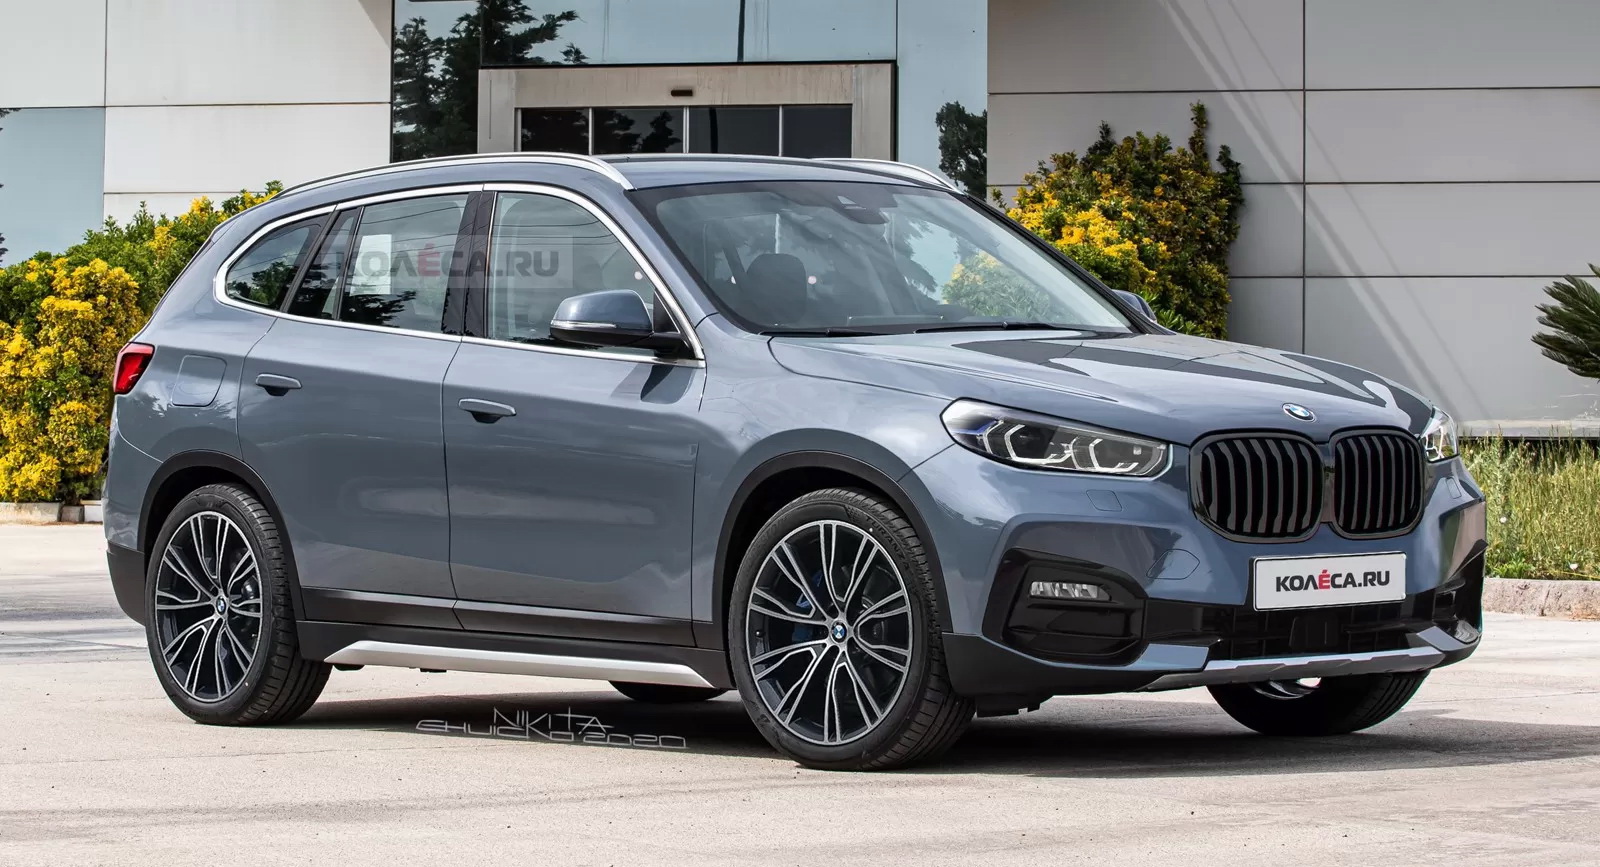 The all-new BMW X1 - Additional images.